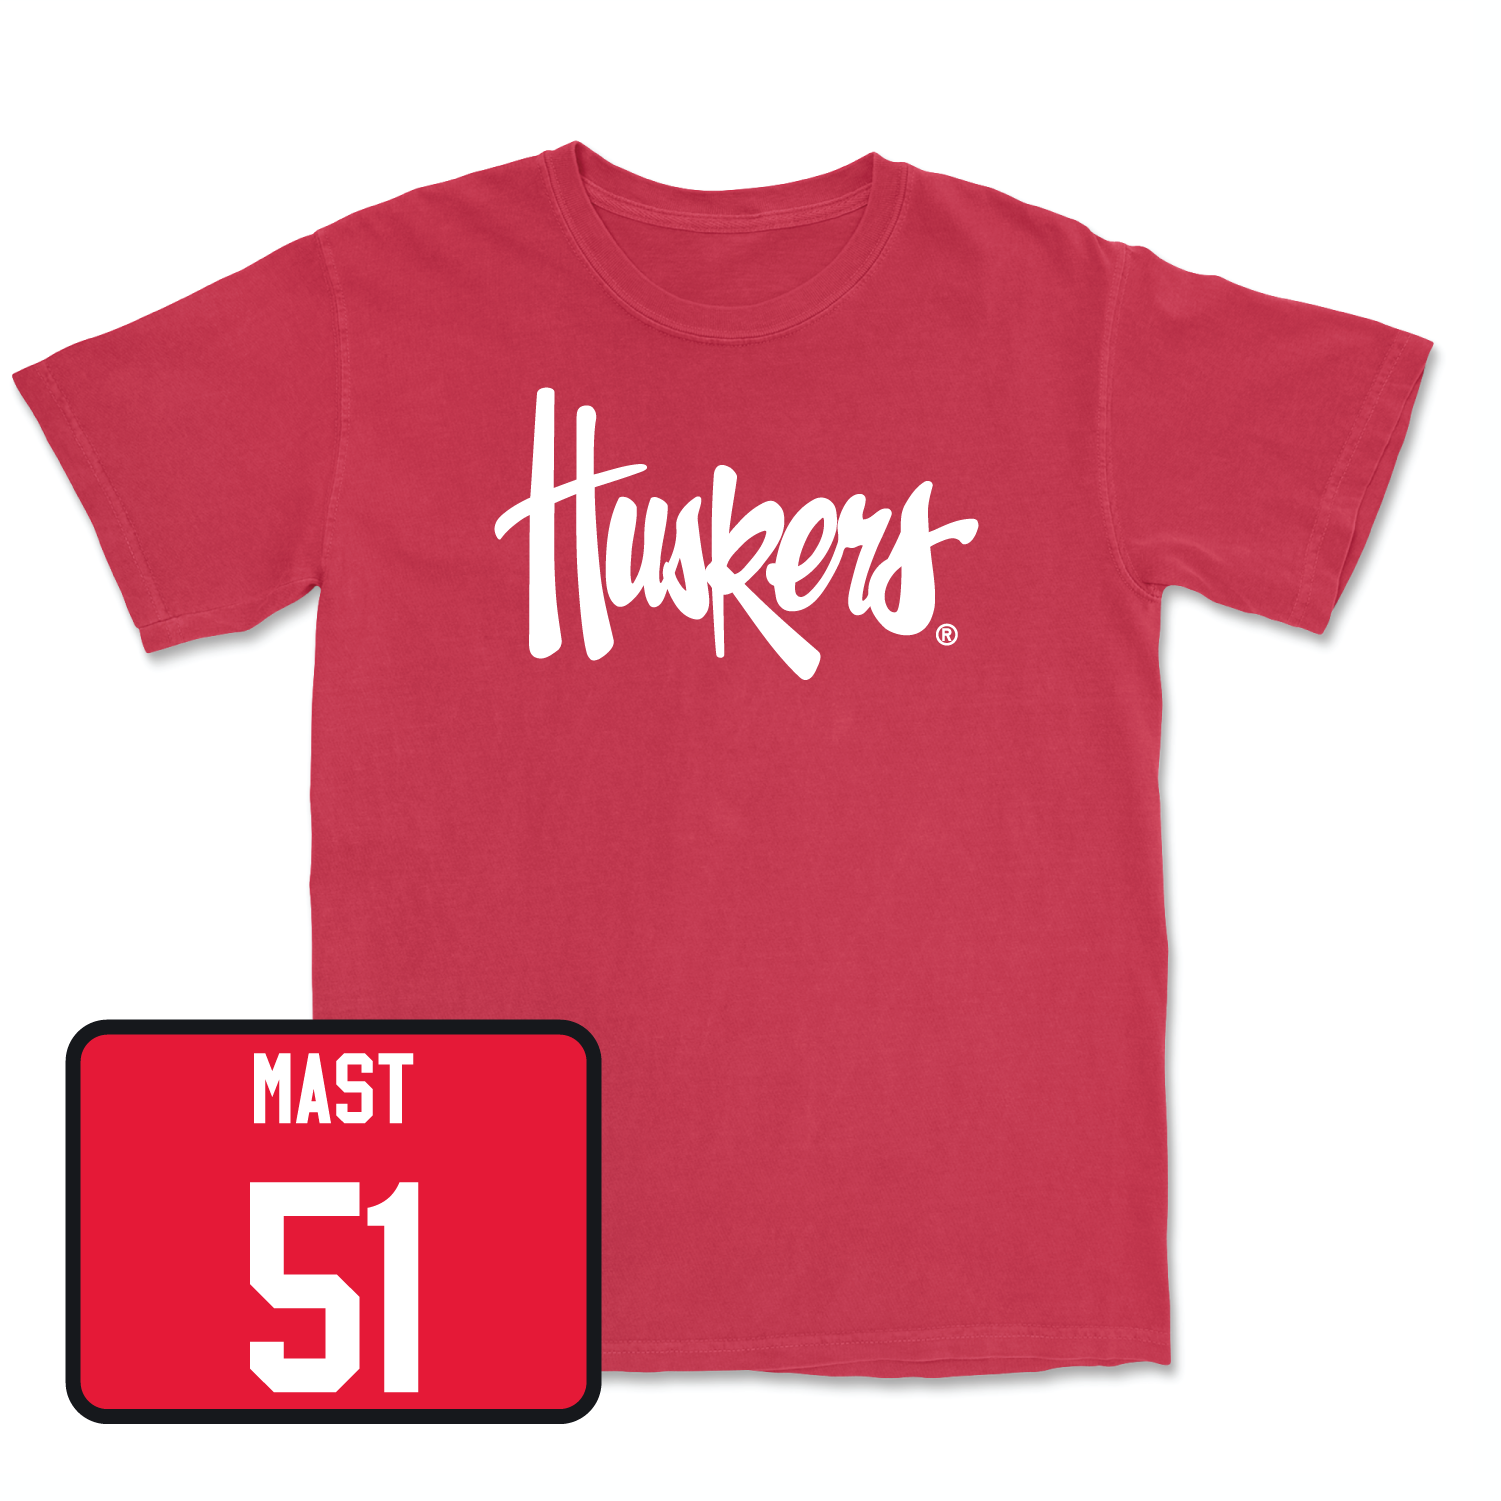 Red Men's Basketball Huskers Tee 2X-Large / Rienk Mast | #51